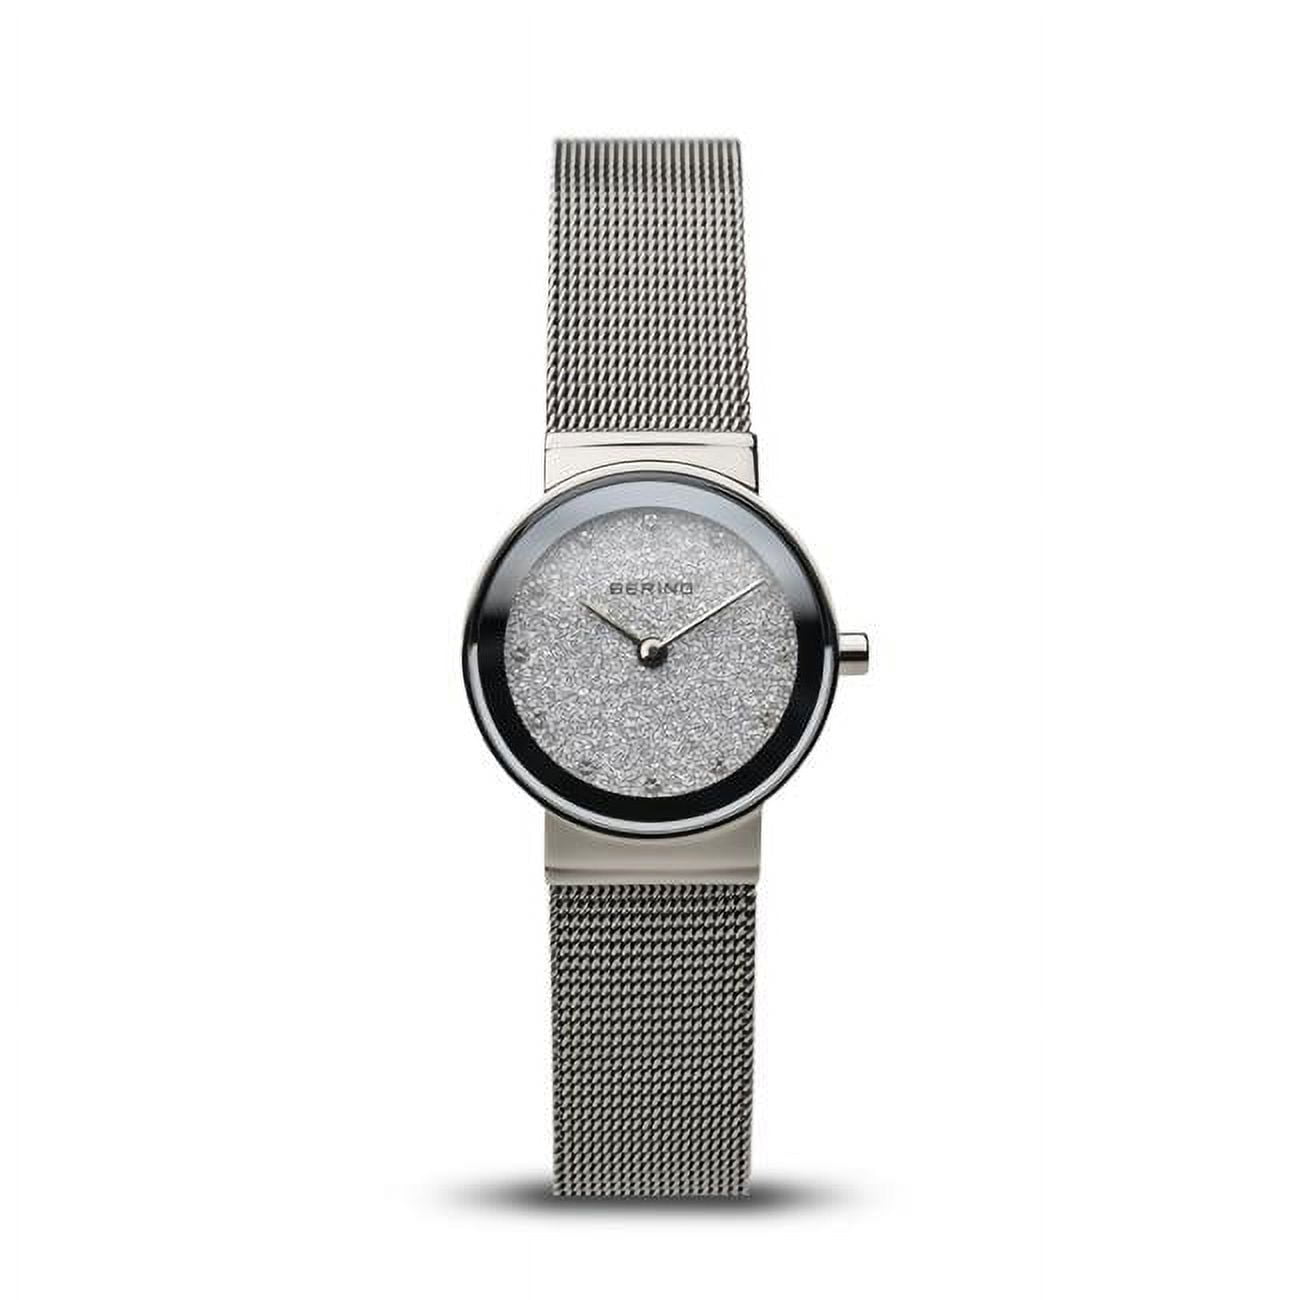 Picture of Bering 10126-0003 Classic Wrist Watch, Polished Silver